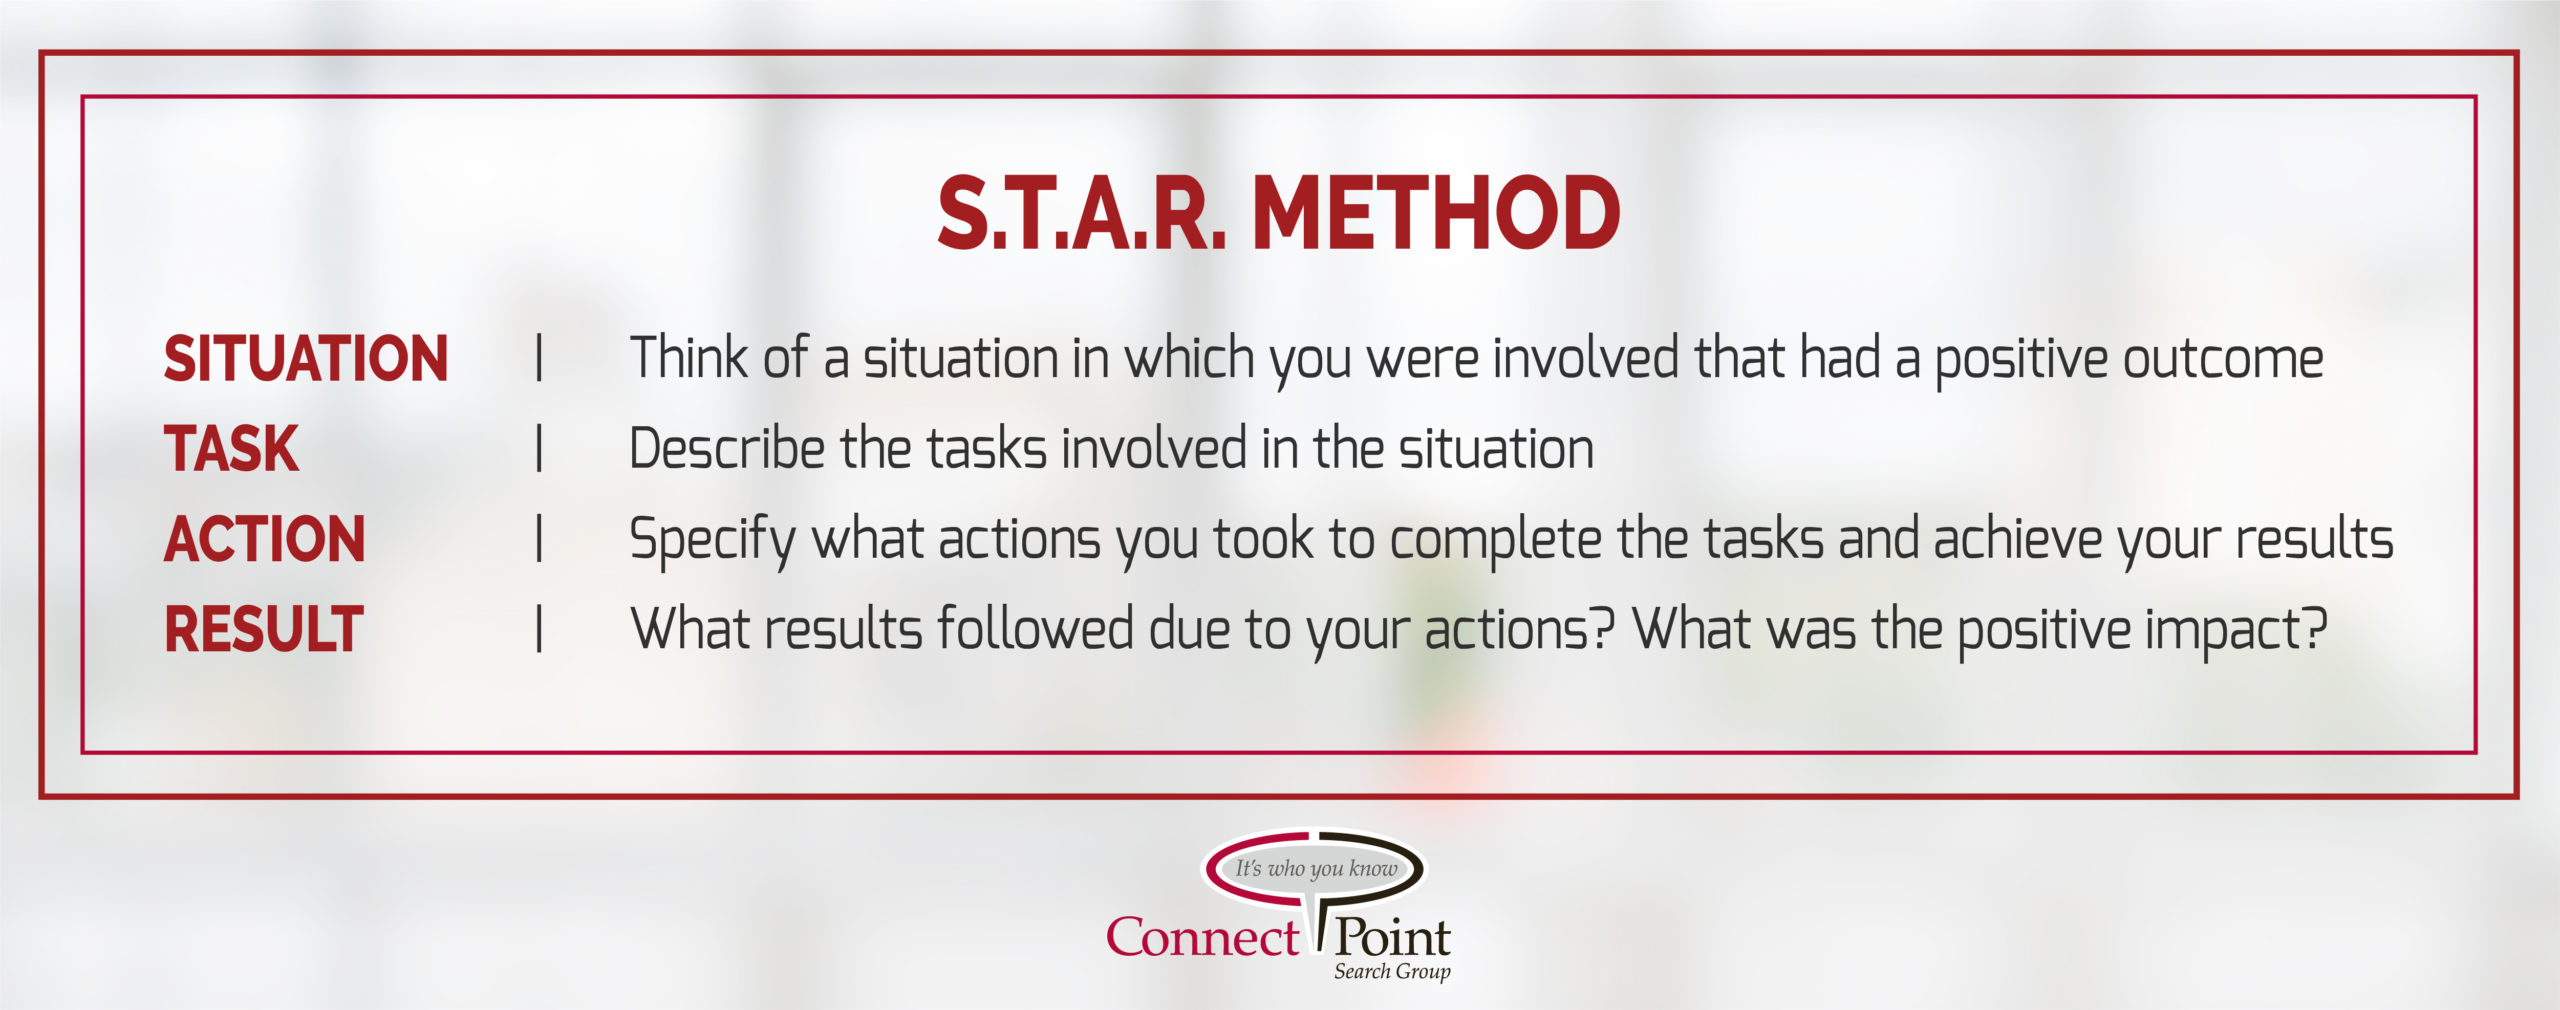 ConnectPoint Search Group, CPSG, CPSG Blog, S.T.A.R. Method, Interview Tips, Common Interview Questions